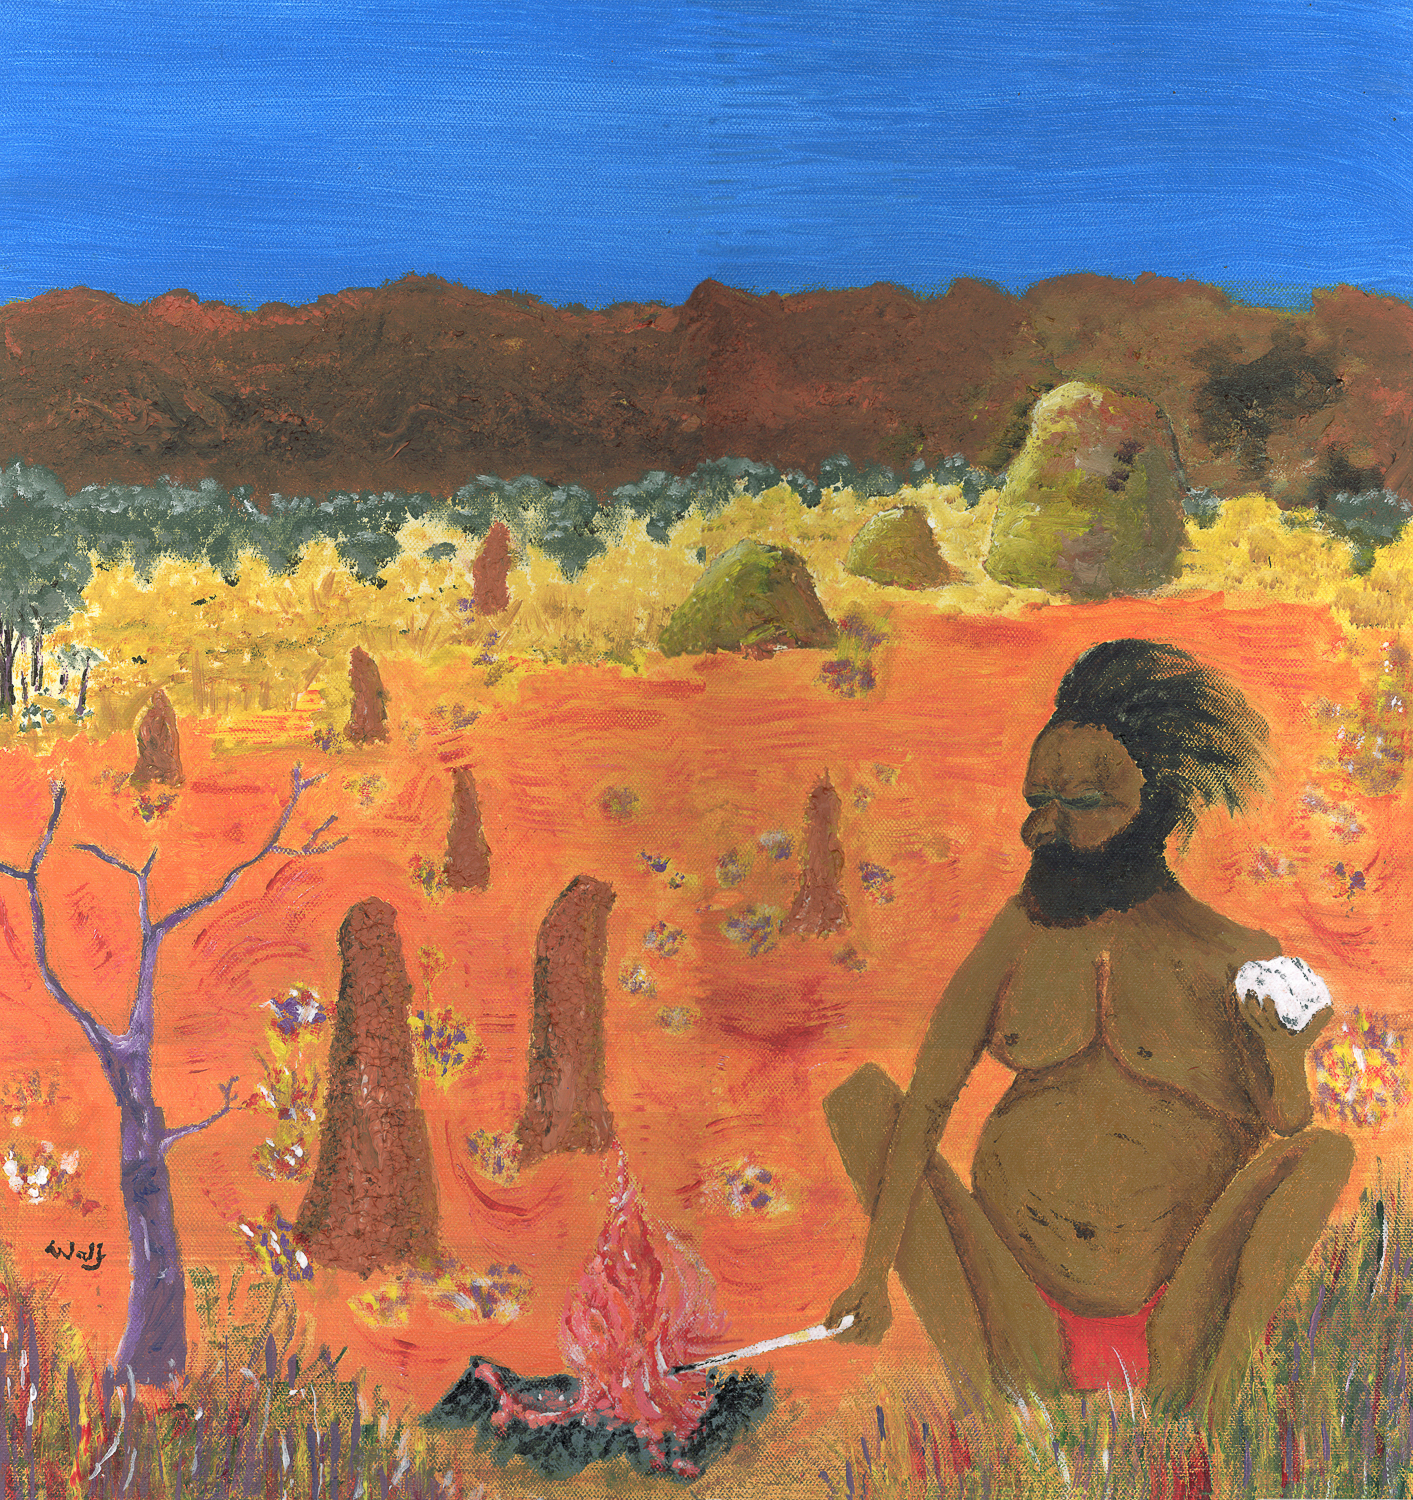 Painting of an indigenous man